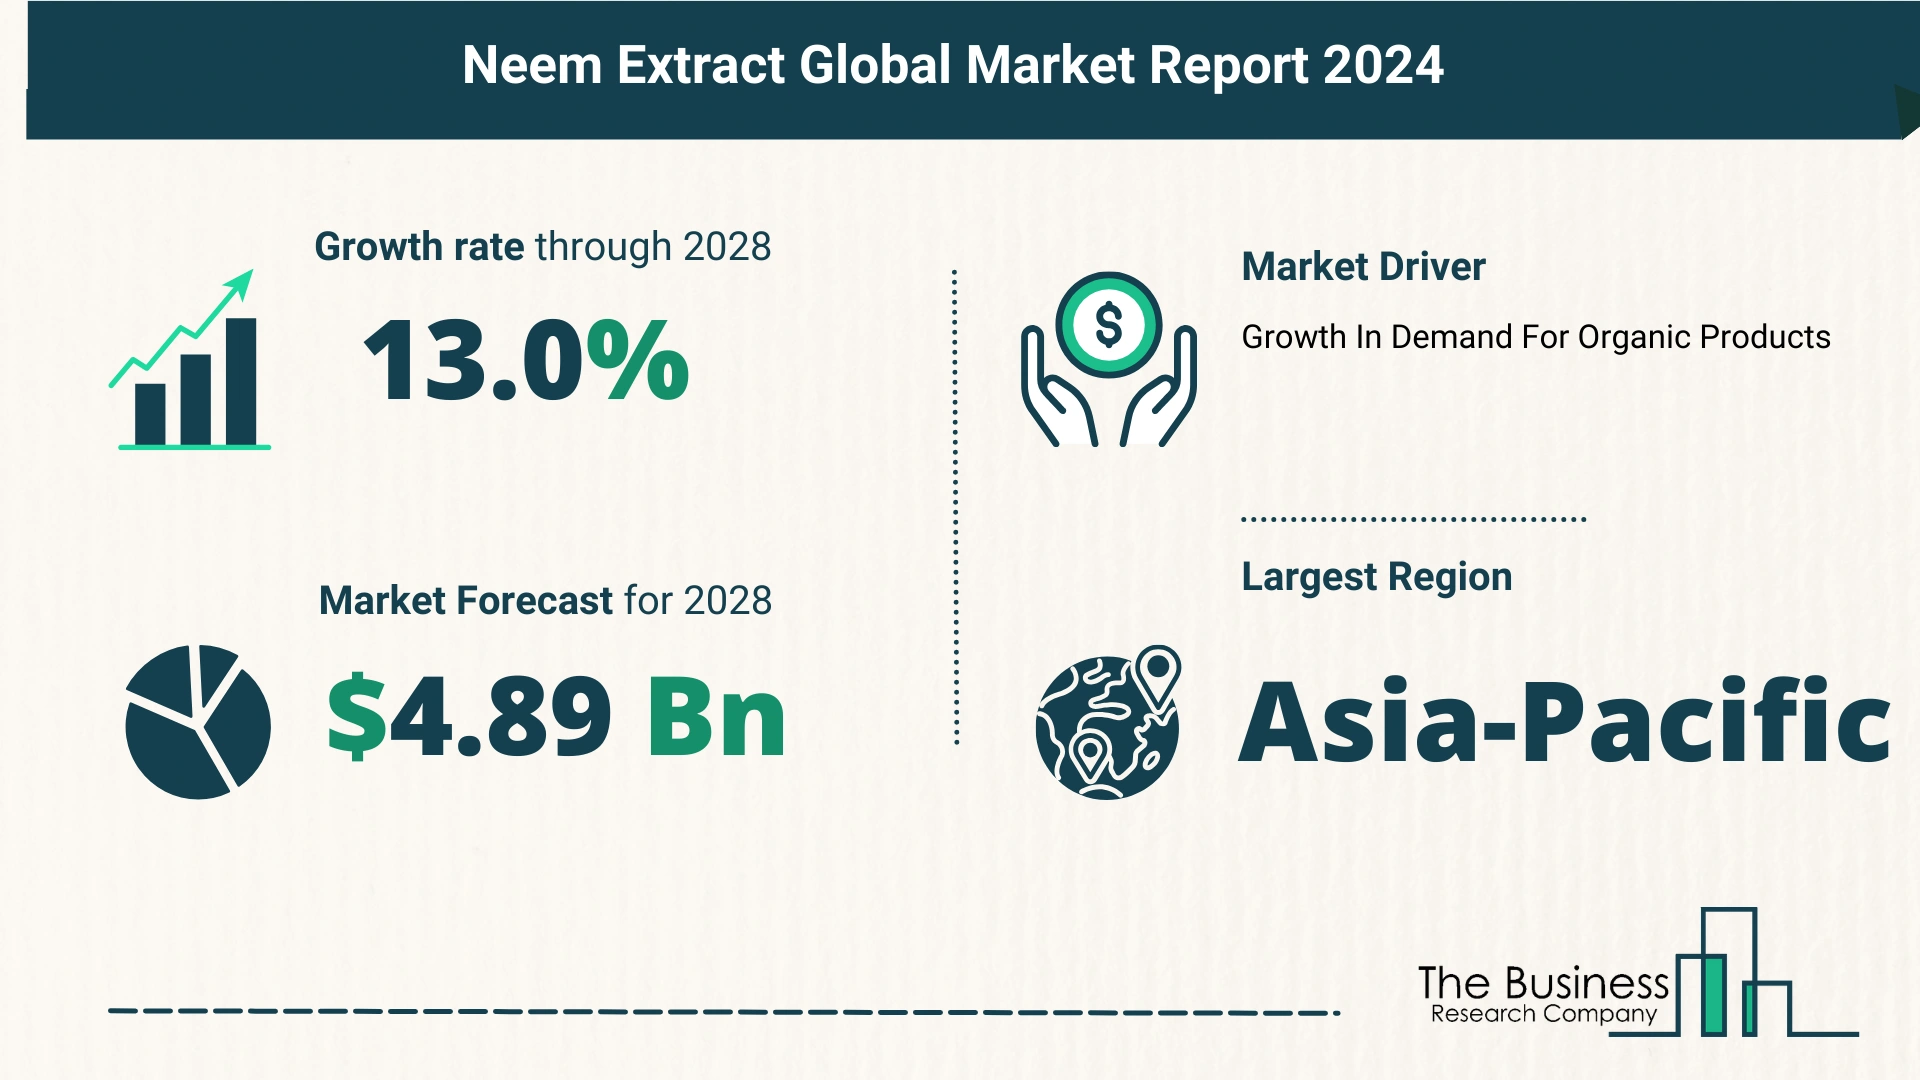 Key Trends And Drivers In The Neem Extract Market 2024